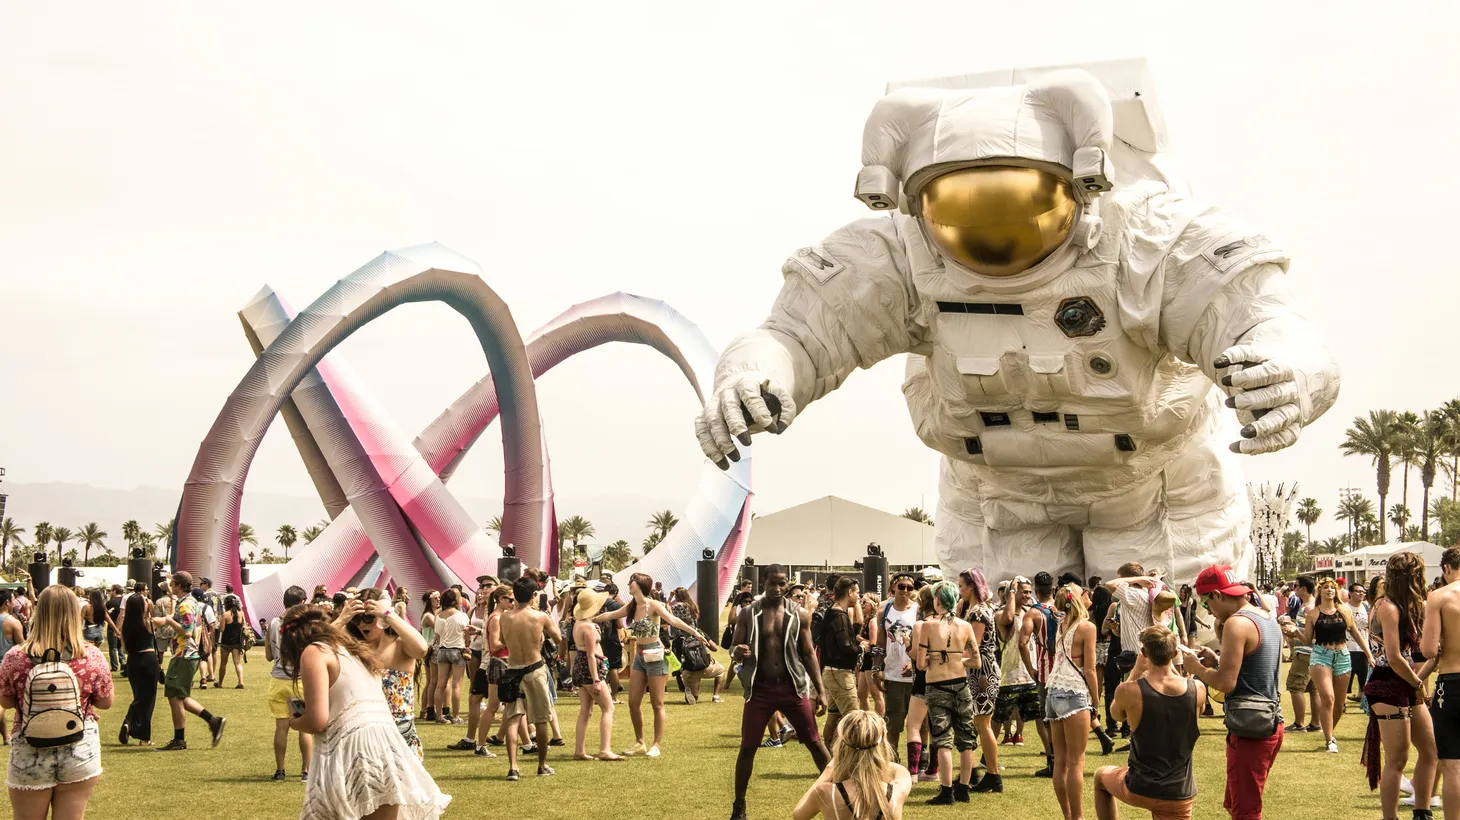 The Coachella Valley Music & Arts Festival returns to Southern California this spring.